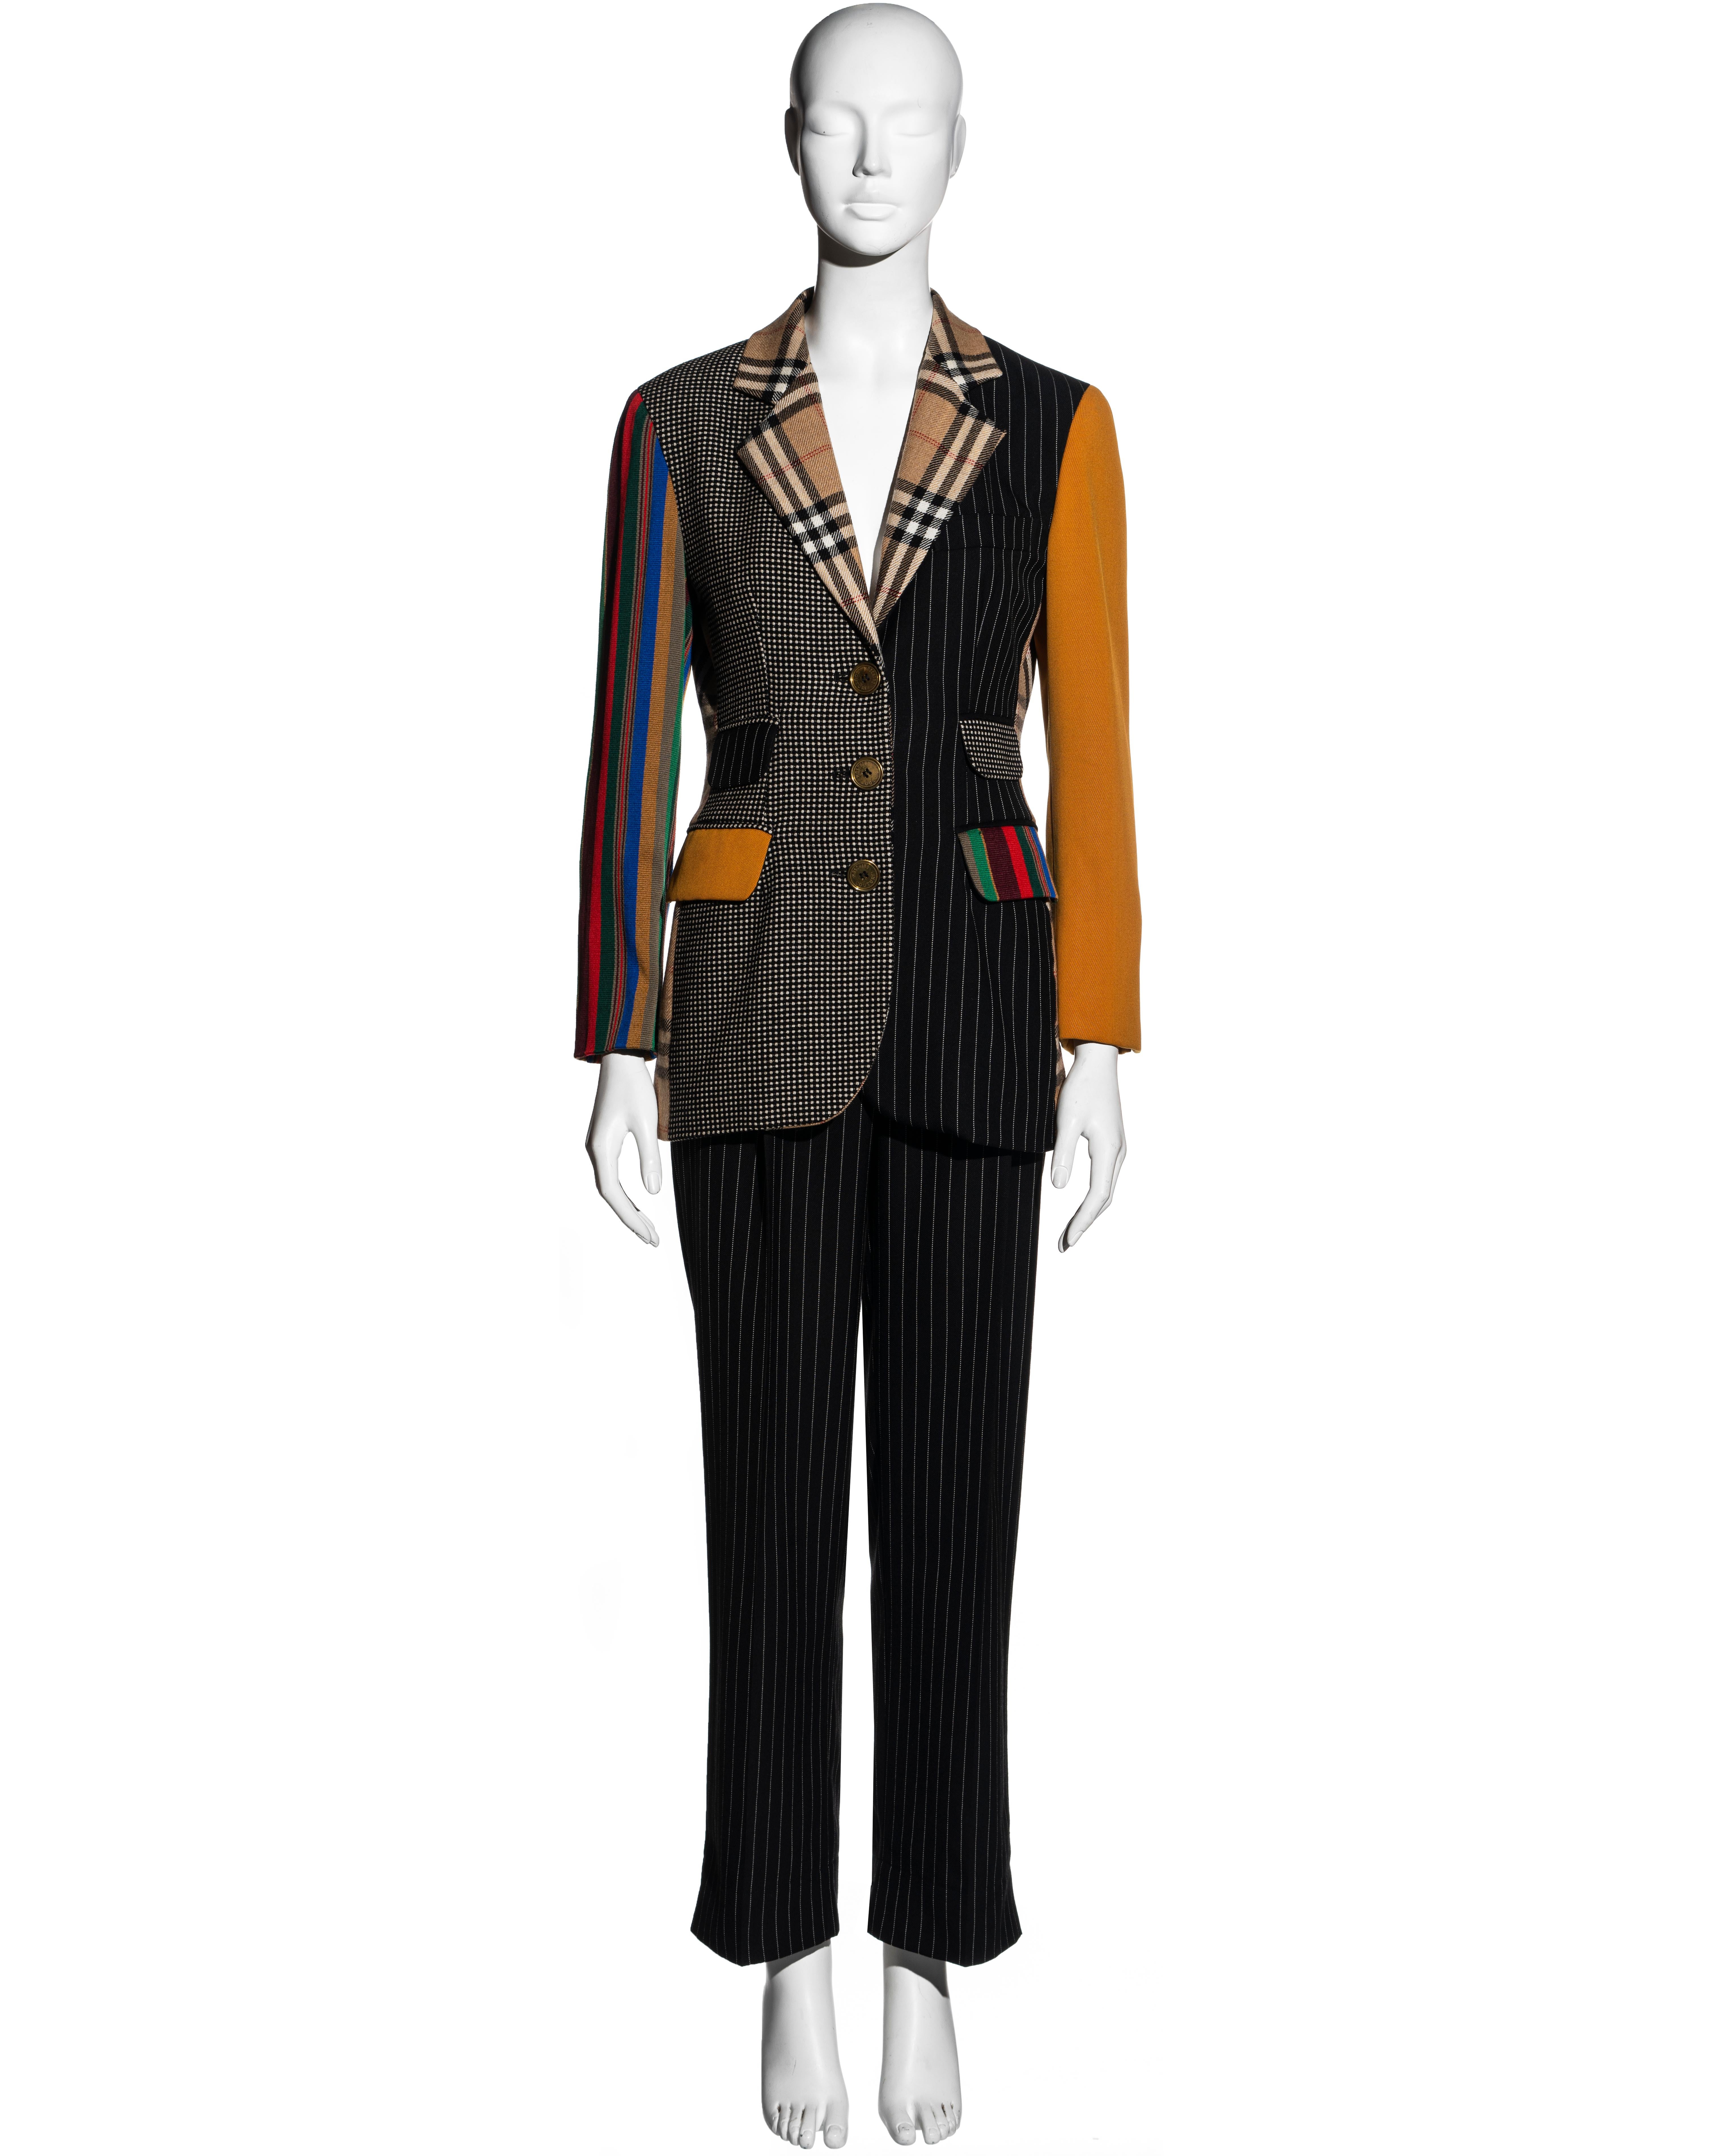 ▪ Moschino Couture wool pantsuit 
▪ Made from a patchwork of various fabrics including a Burberry Nova check inspired wool
▪ Singled breasted blazer jacket with notched lapel and four front flap pockets 
▪ Large 'Moschino' etched buttons 
▪